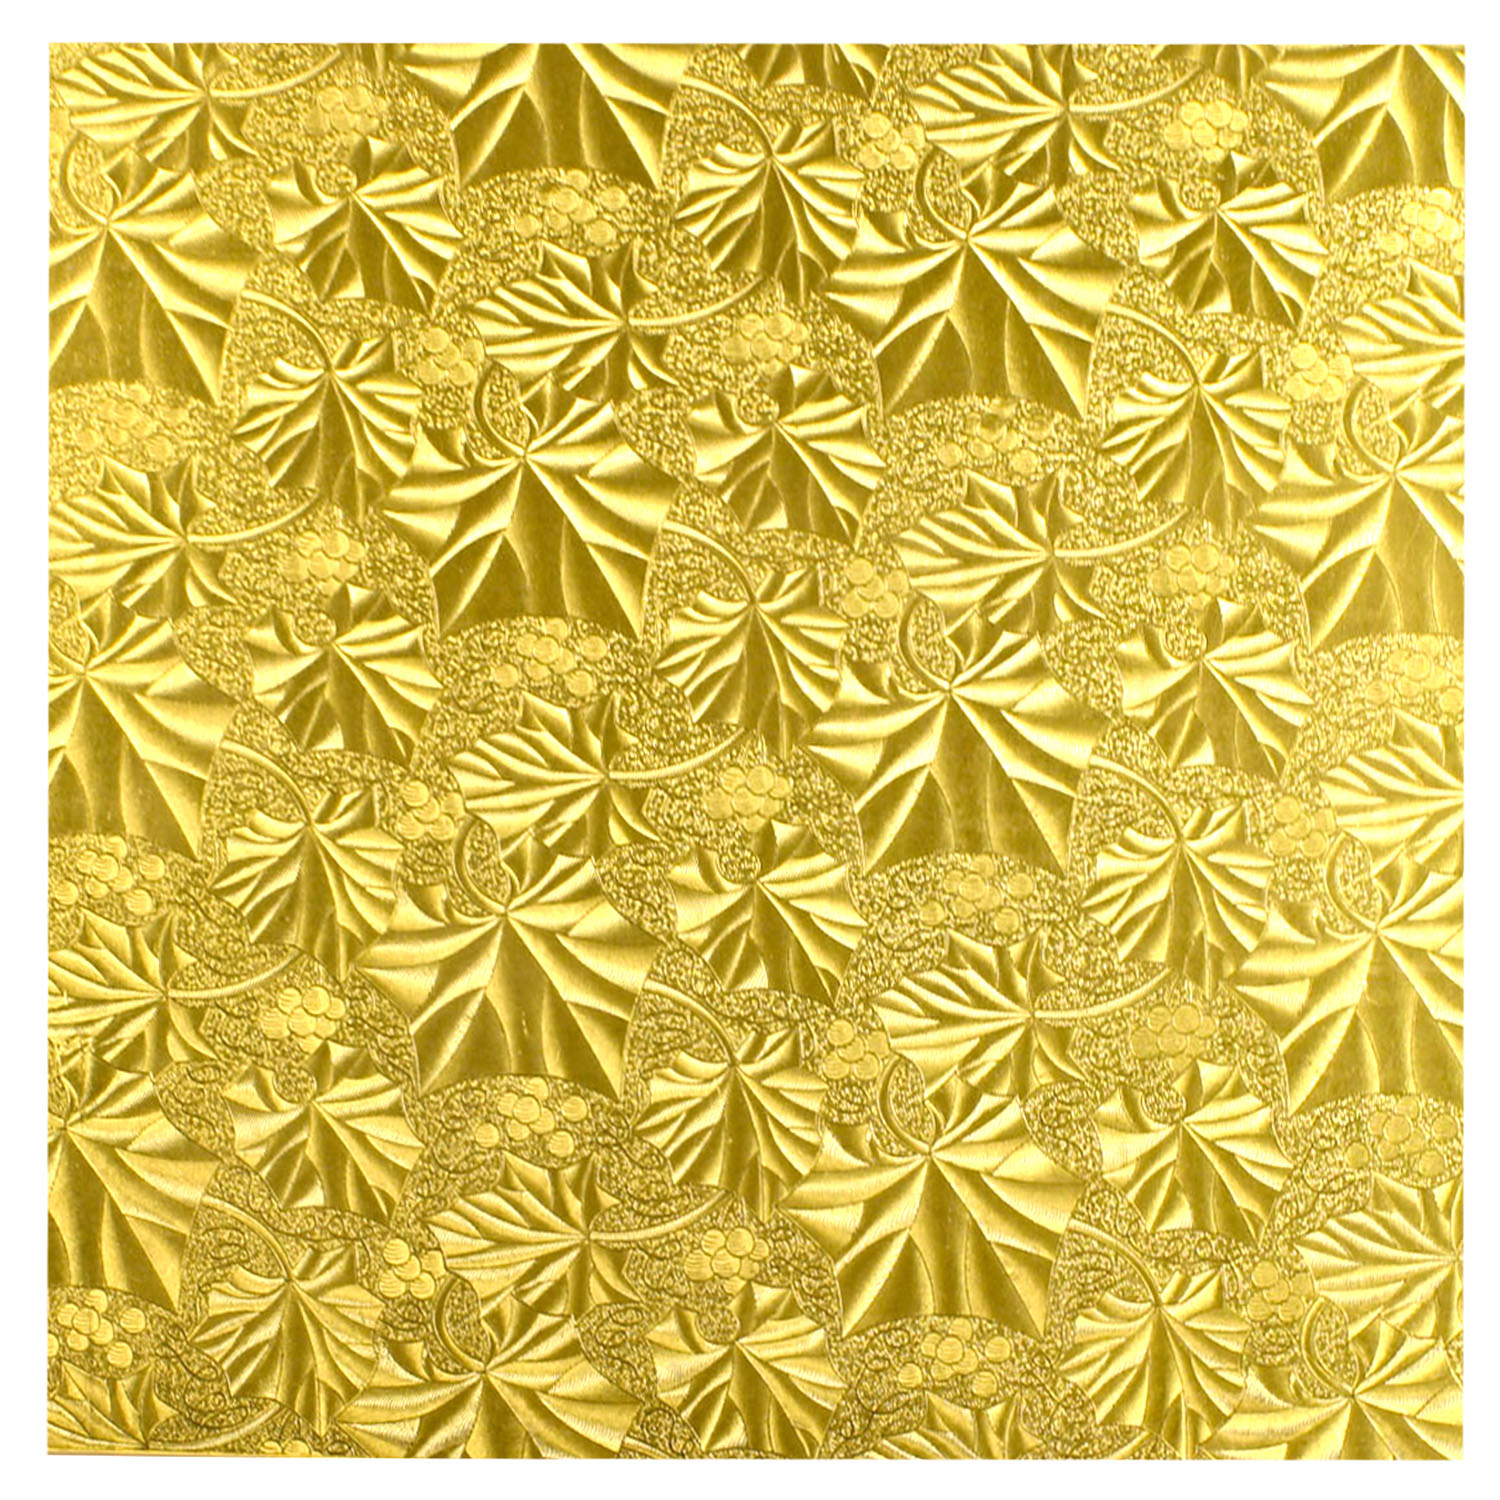 Square Gold Foil Cake Board, 9" x 1/4" Thick, Pack of 12 